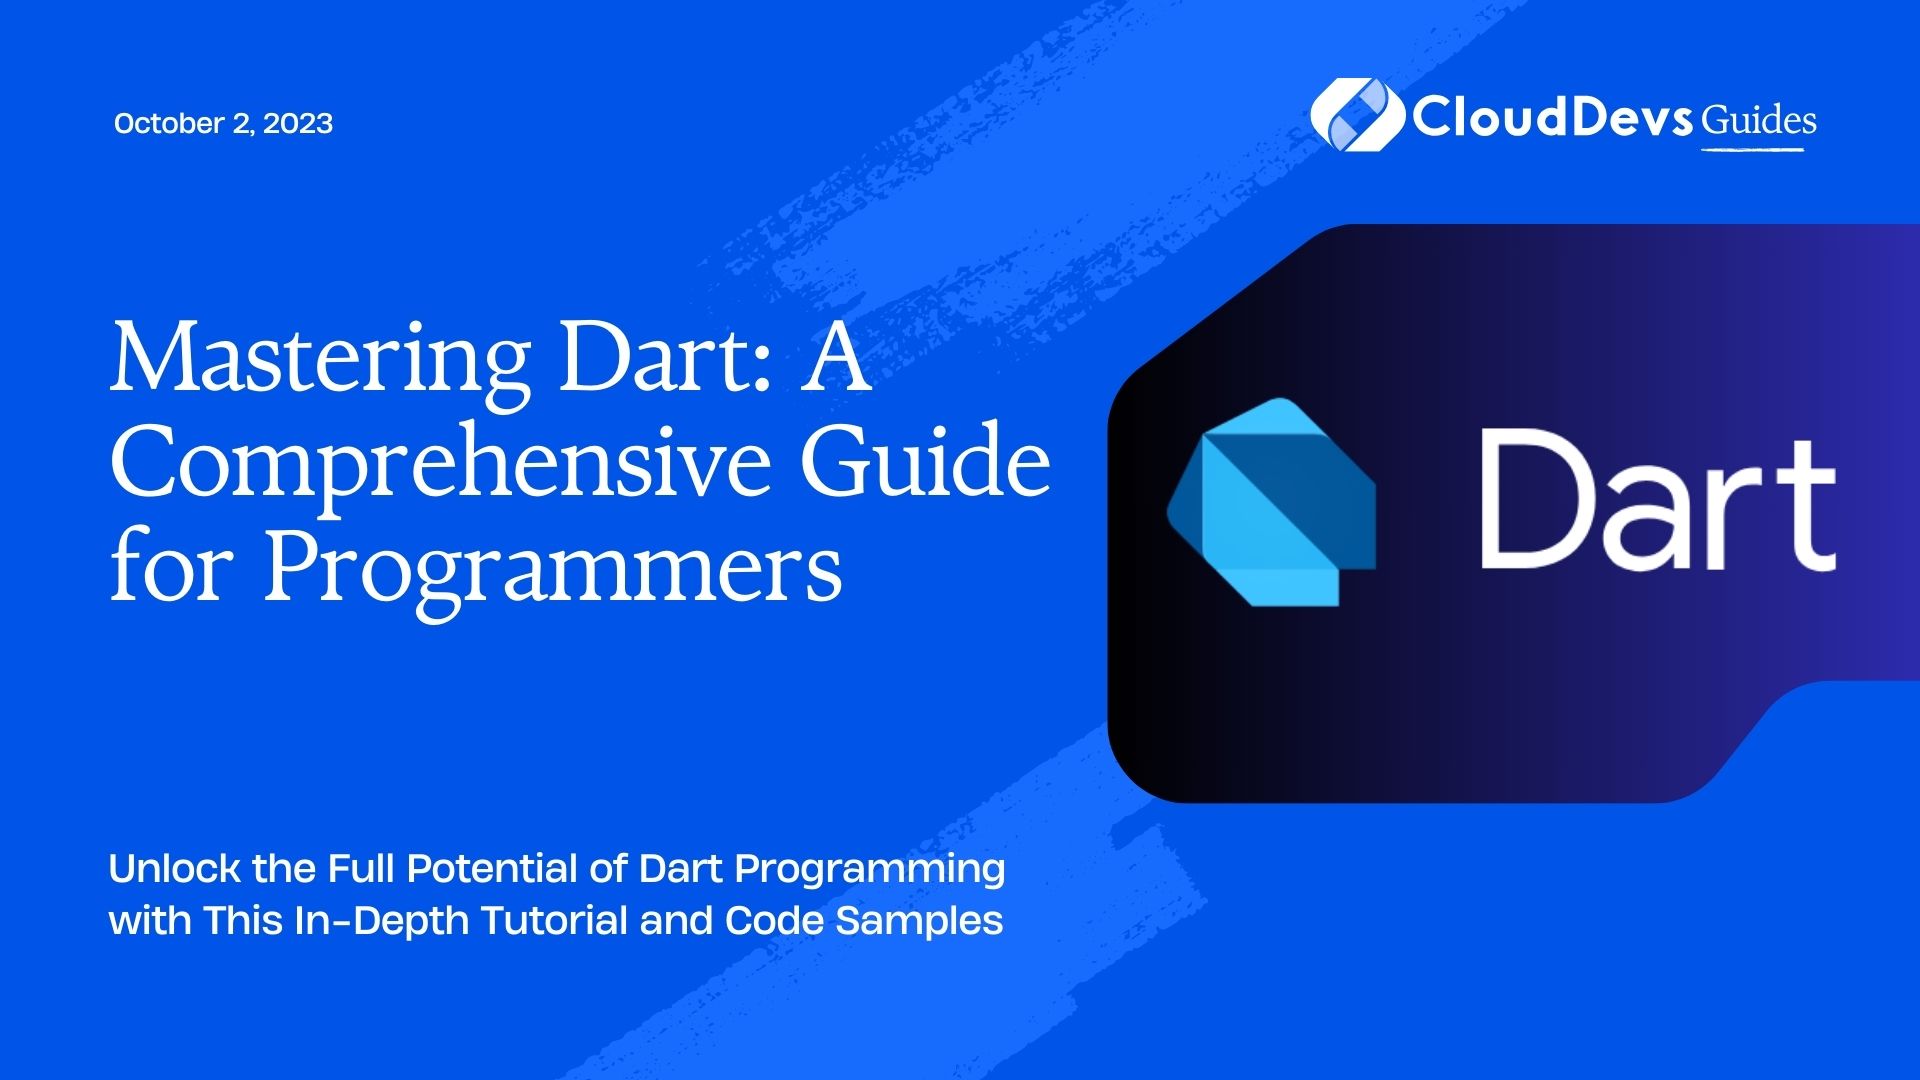 Mastering Dart: A Comprehensive Guide for Programmers